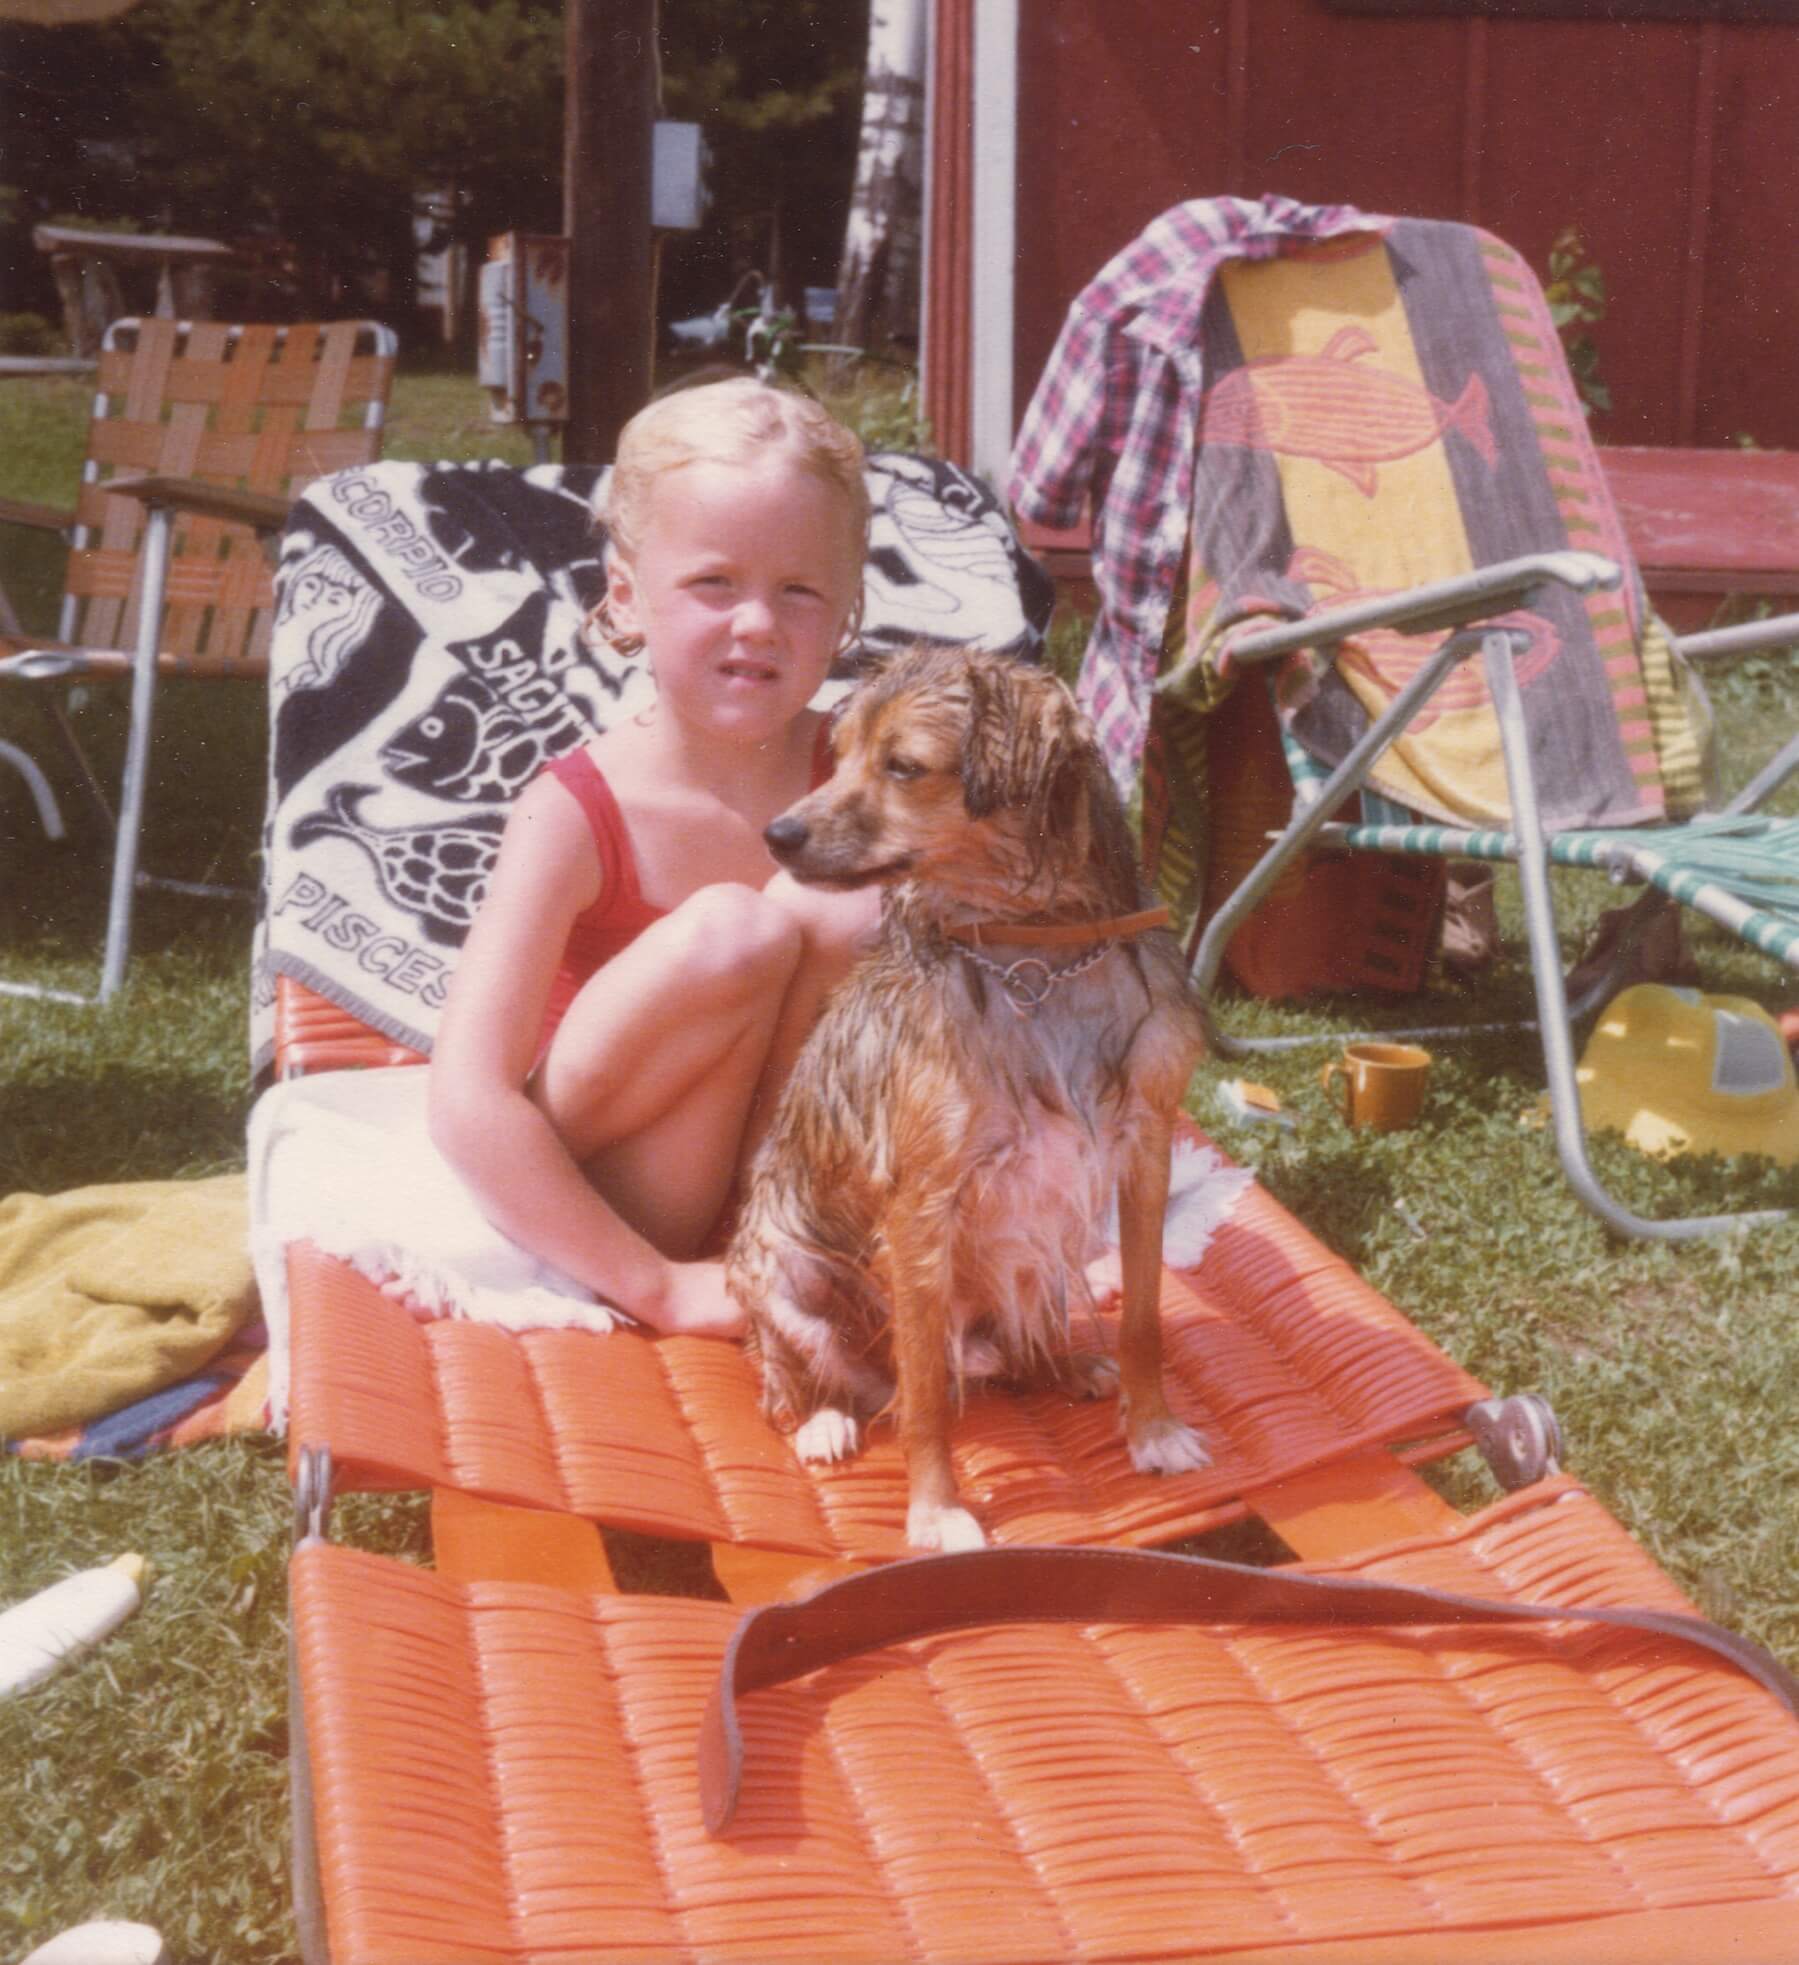 A young me, five years old, sitting on a lounge chair with towels strewn across the back of it, other lounge chairs are in the background, and a small, wet, dog sits in front of me, as I stare at the photographer with a hint of skepticism.